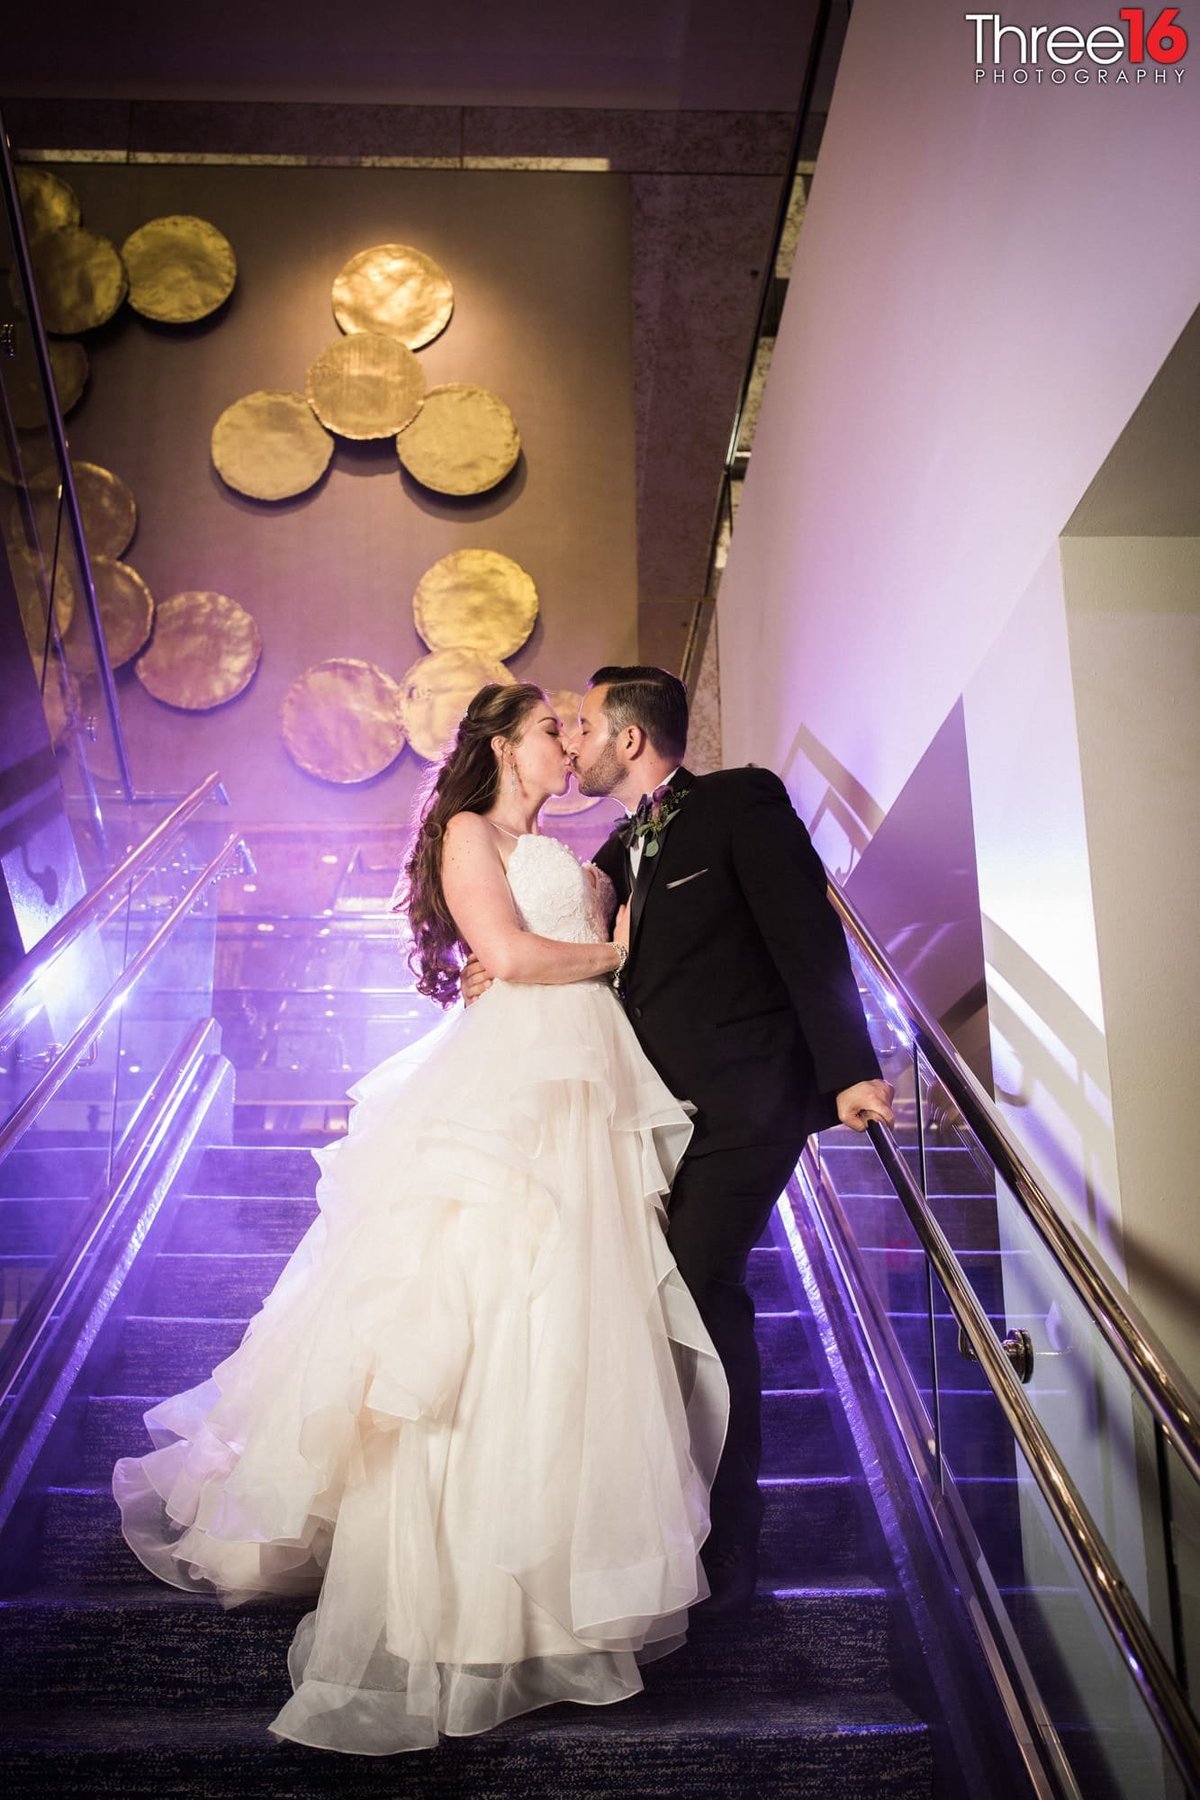 Bride and Groom stop for a kiss on the stairwell with purple hint behind them